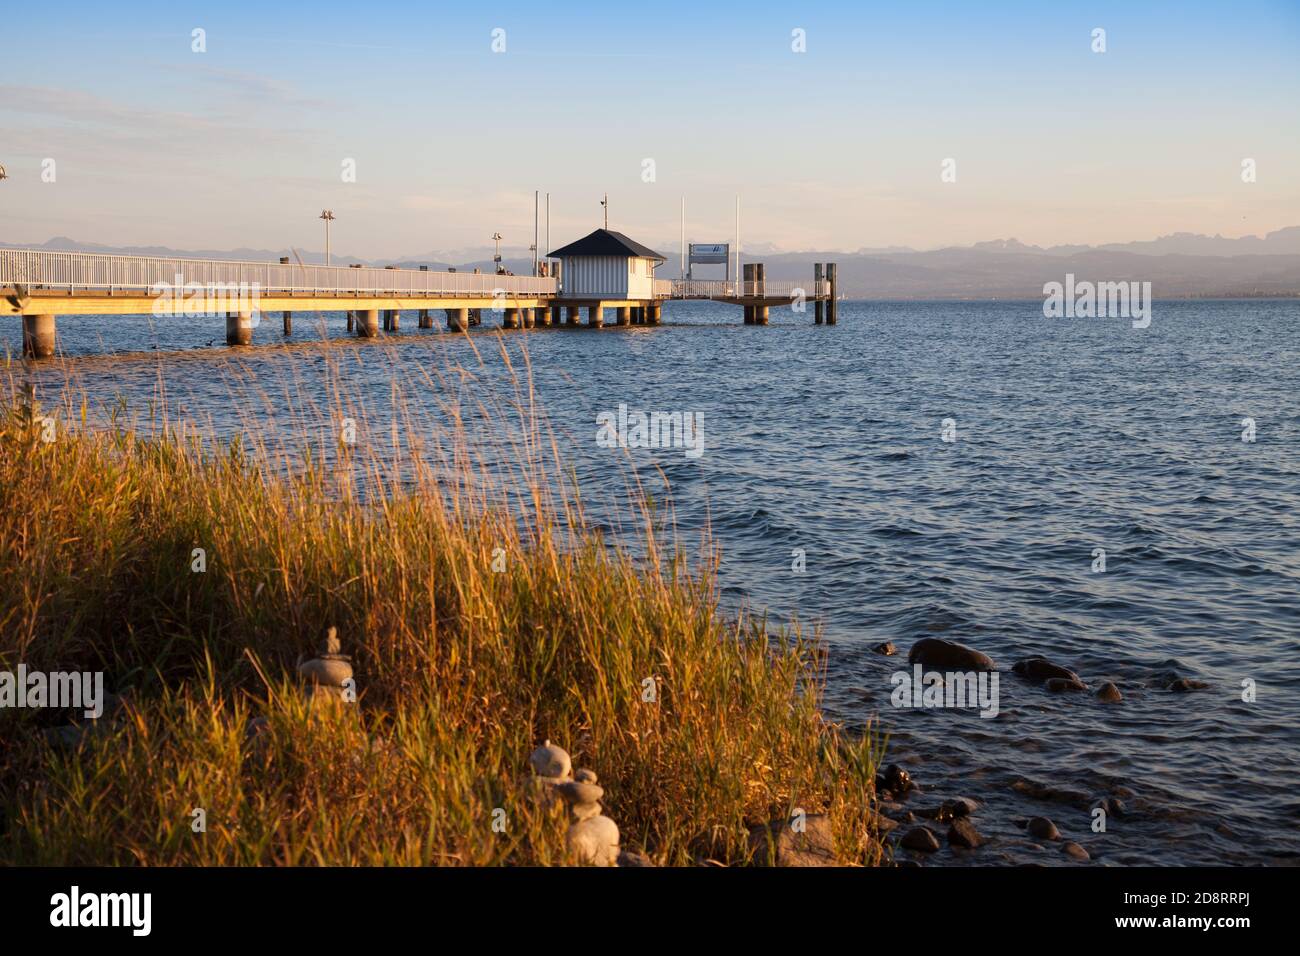 Landing Pier in Immenstaad, Germany Stock Photo